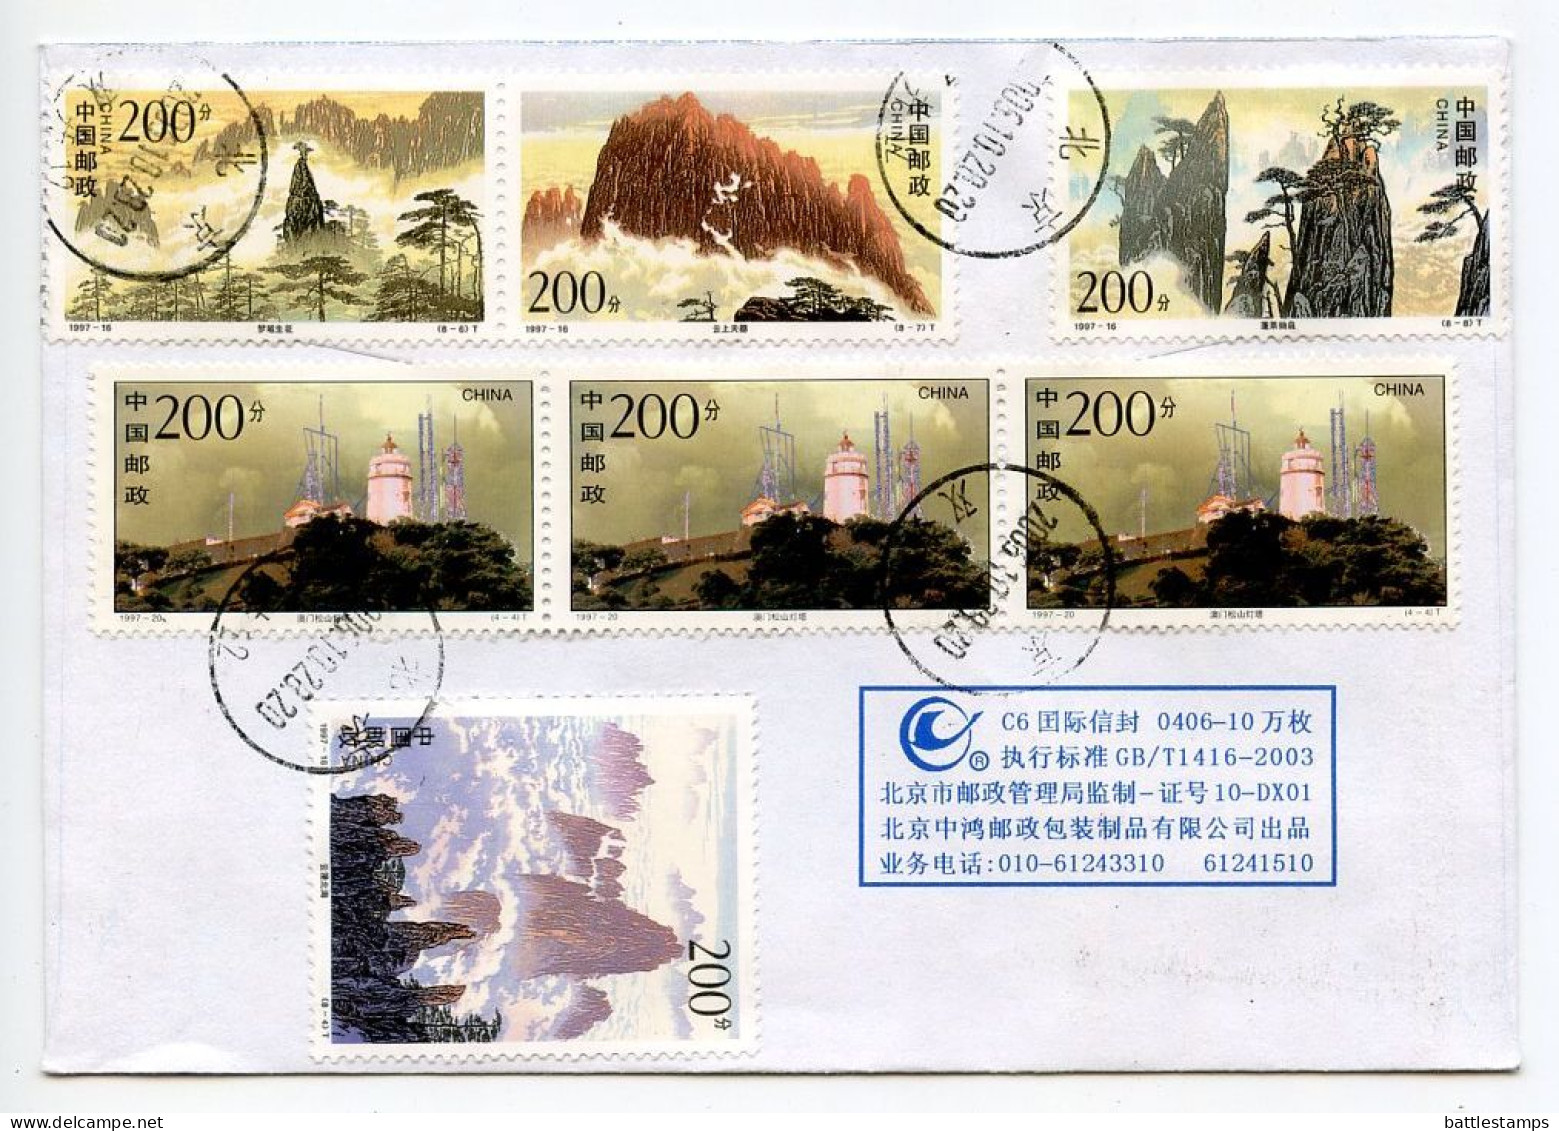 China, PRC 2006 Registered Airmail Cover - Bejing To Hartford, Vermont; Scott 2805d & F-h, And 2815 X 3 - Storia Postale